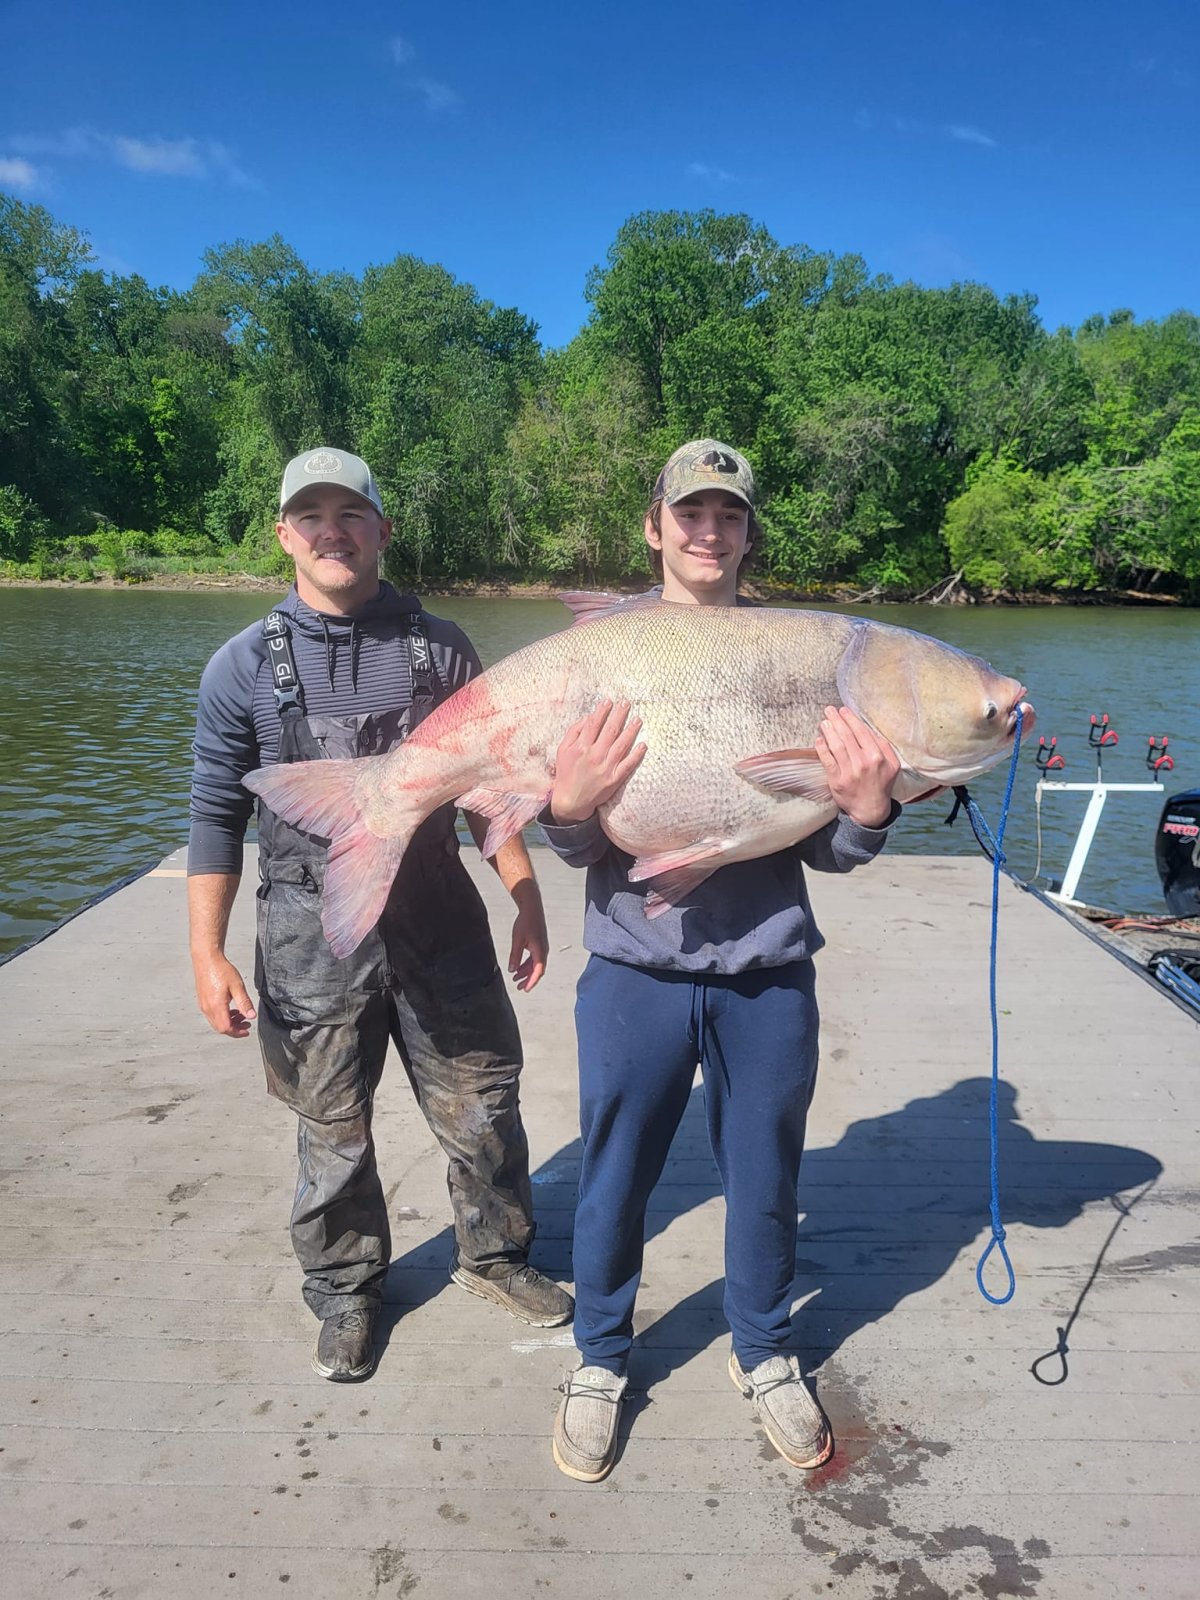 Man Reels 'Beast' 110-Pound Carp in Potential World Record-Breaking Catch